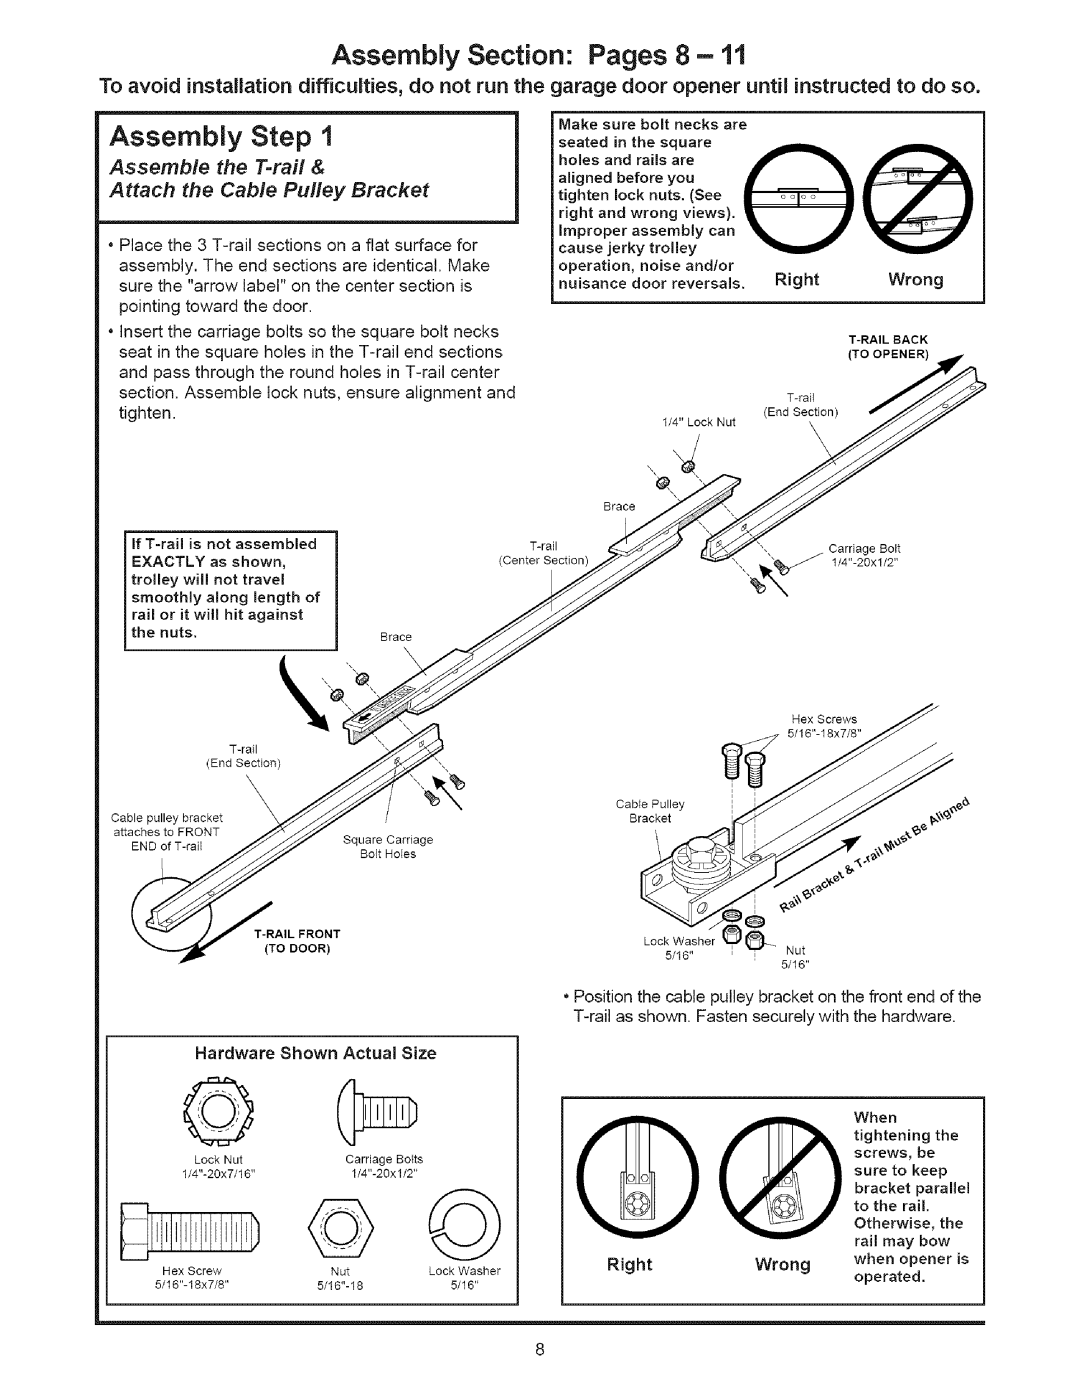 Sears 139.53535SRT1 Assembly Section Pages 8, Assembly Step, Assemble the T=rail Attach the Cable Pulley Bracket 